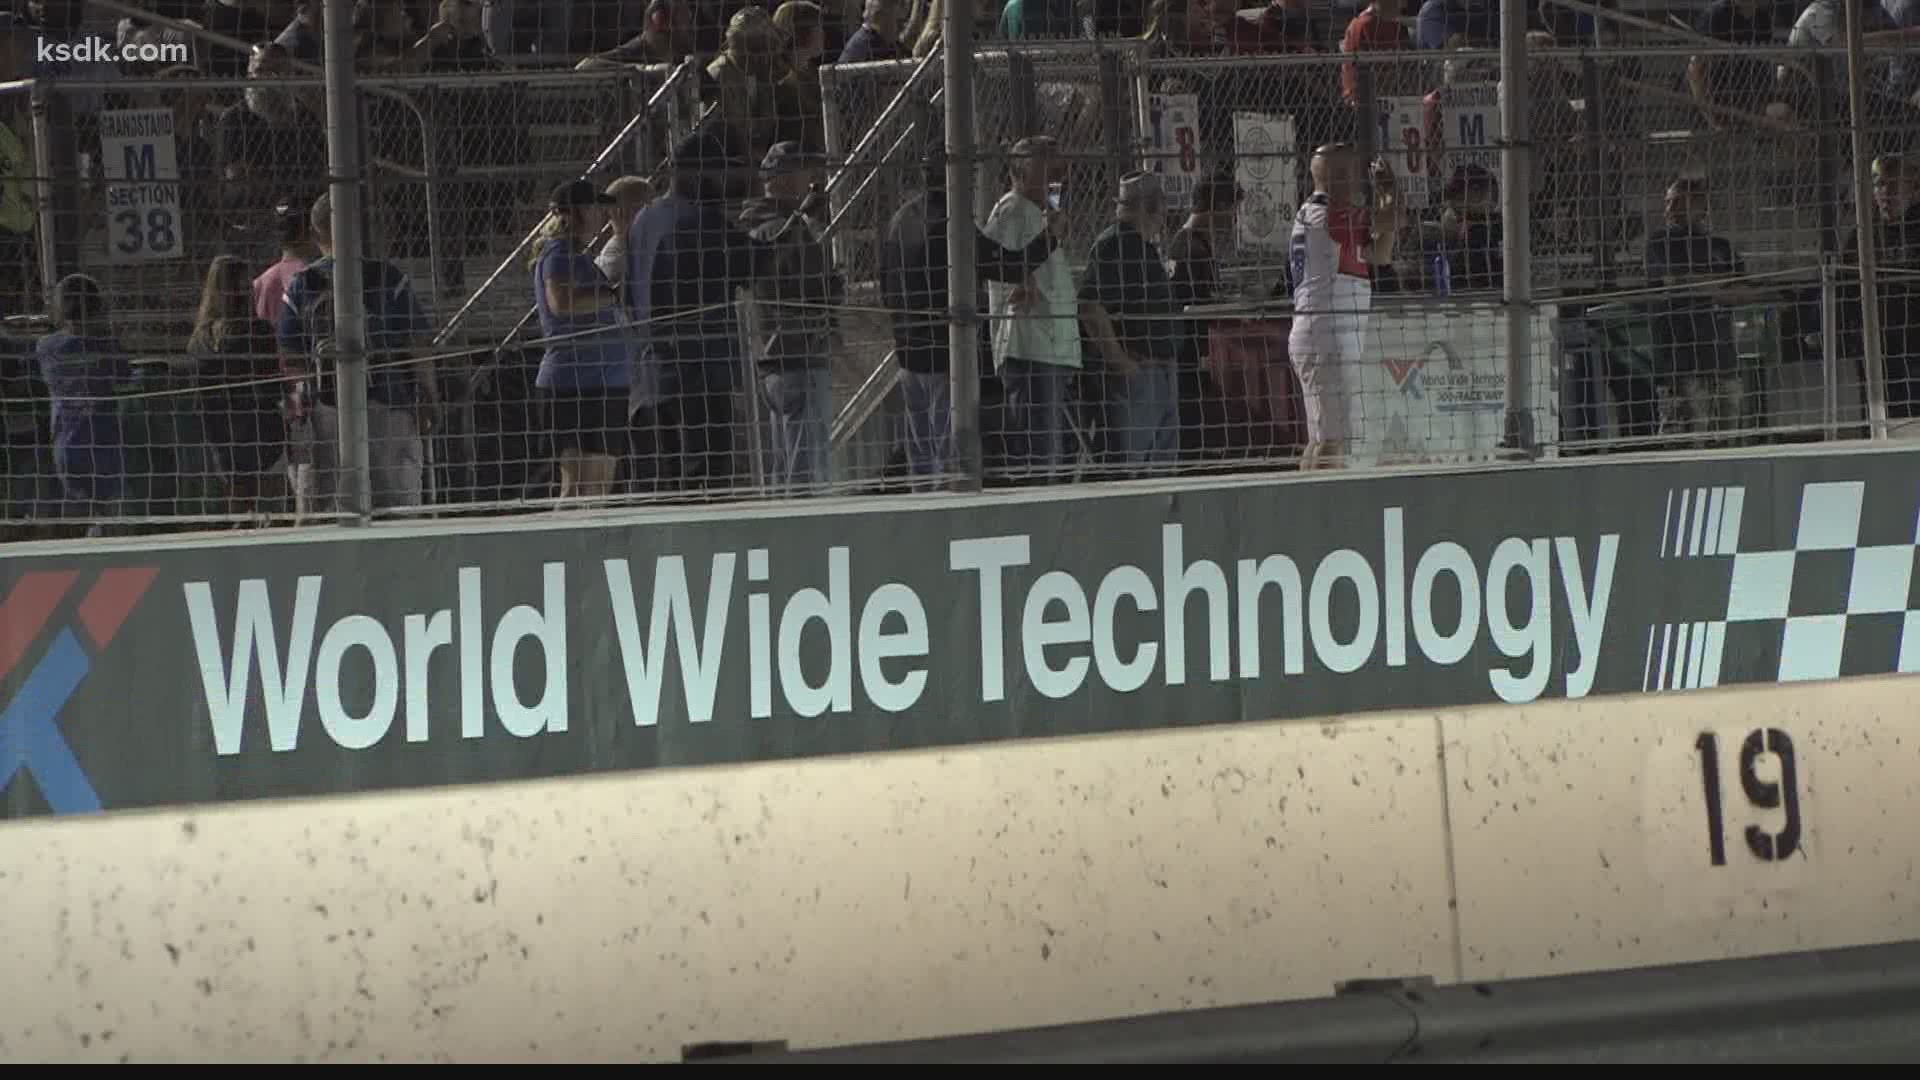 With two grandstands they could do some social distancing at World Wide Technology Raceway.